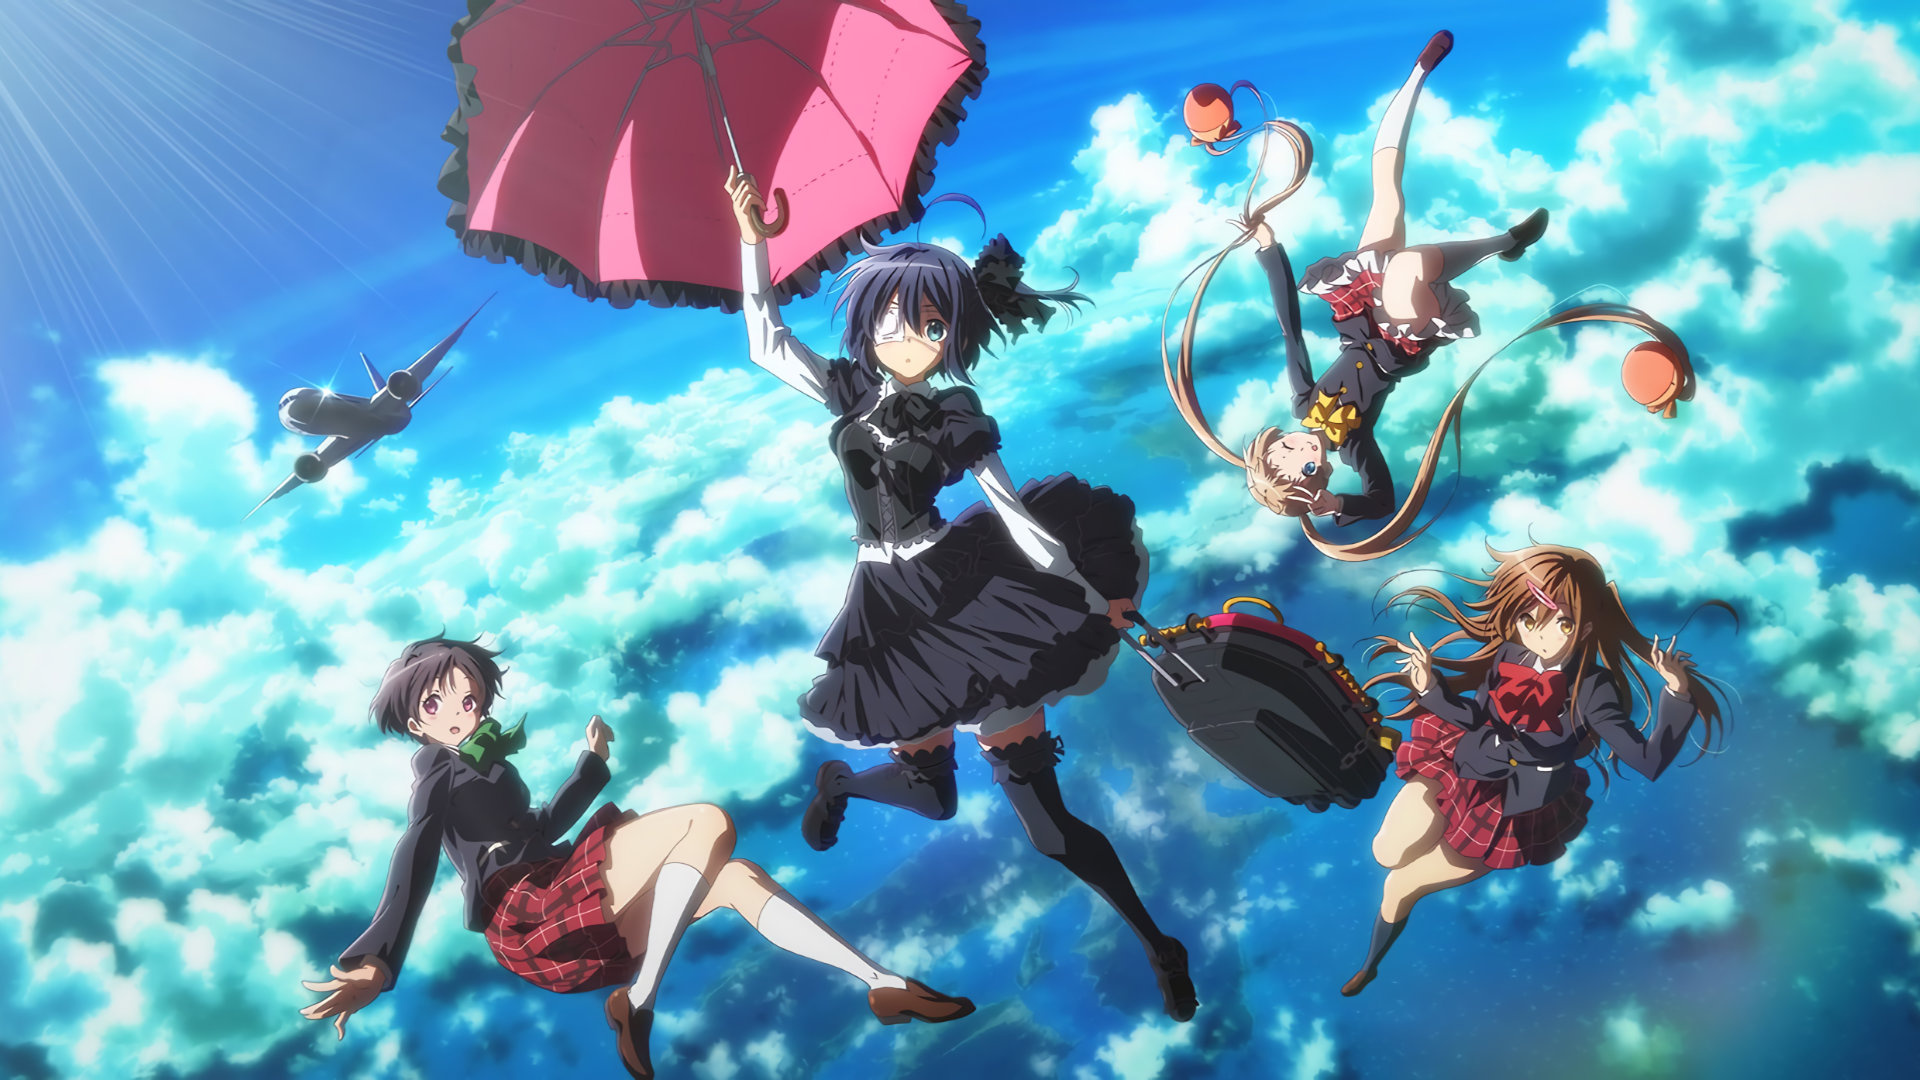 Love, Chunibyo and Other Delusions, Watch order, Anime episodes, 2022 anime, 1920x1080 Full HD Desktop